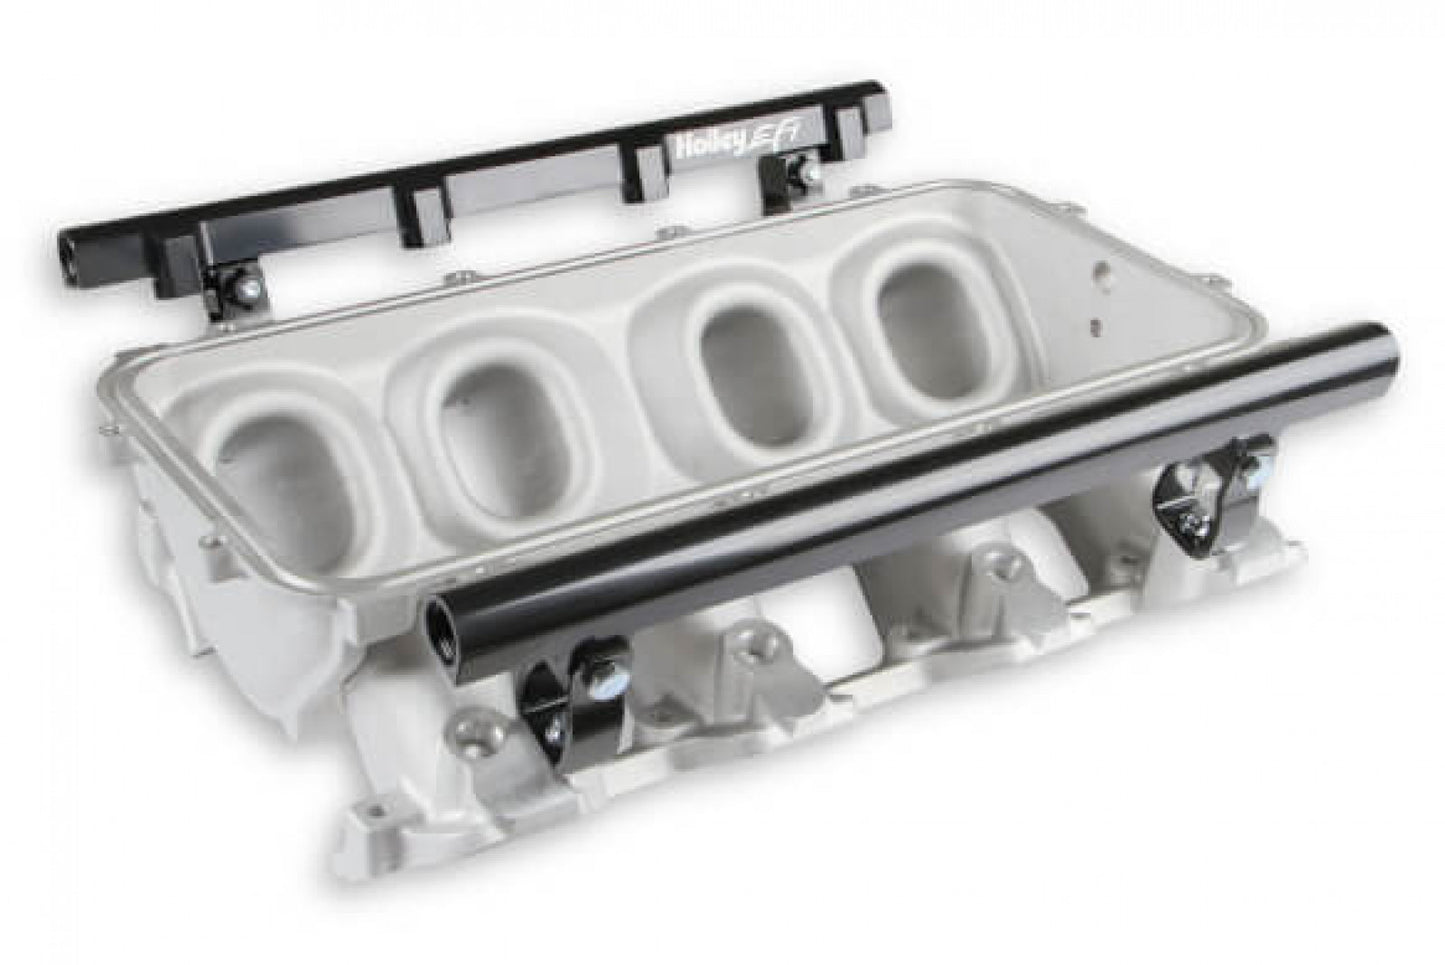 Holley EFI Base Manifold and Rail Kit for Lo-Ram - LS1/LS2/LS6 3300-600